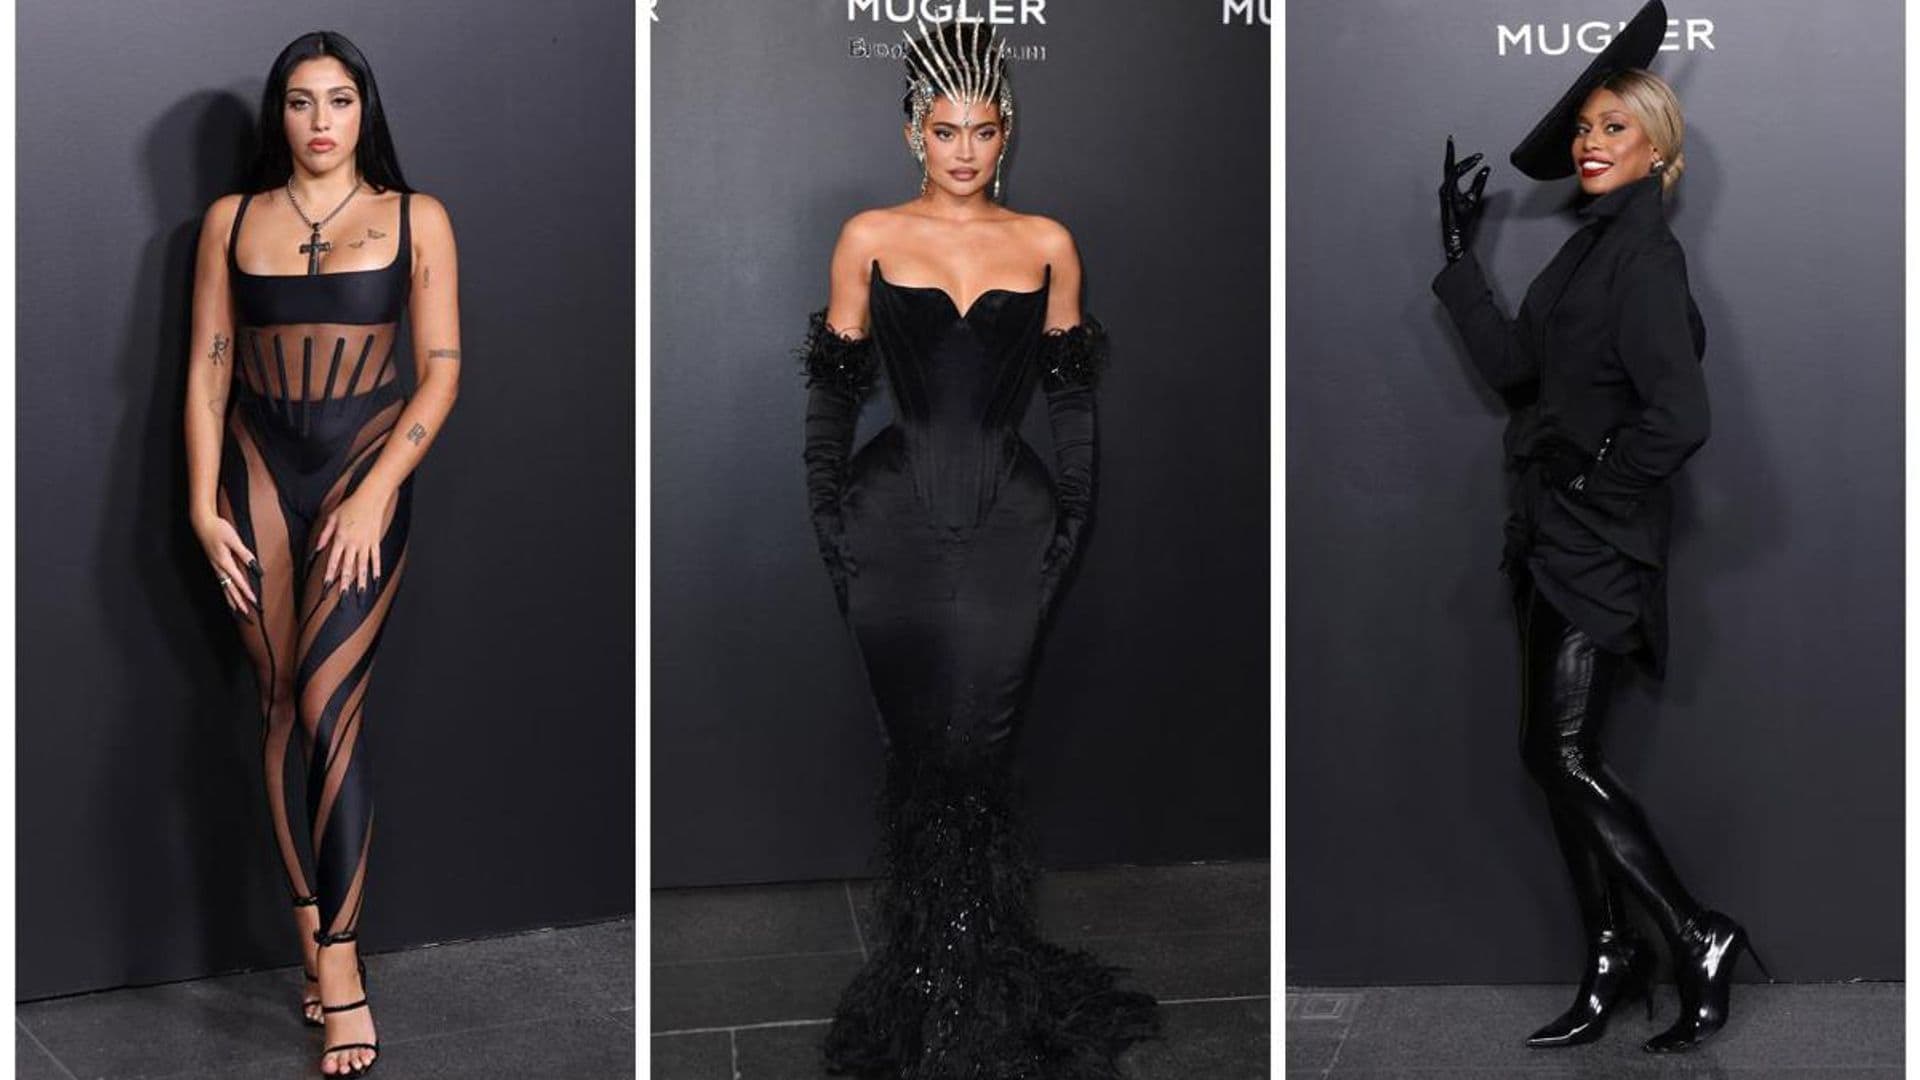 Kylie Jenner, Lourdes Leon, Julia Fox and others stun at the Mugler Exhibition in New York [Photos]